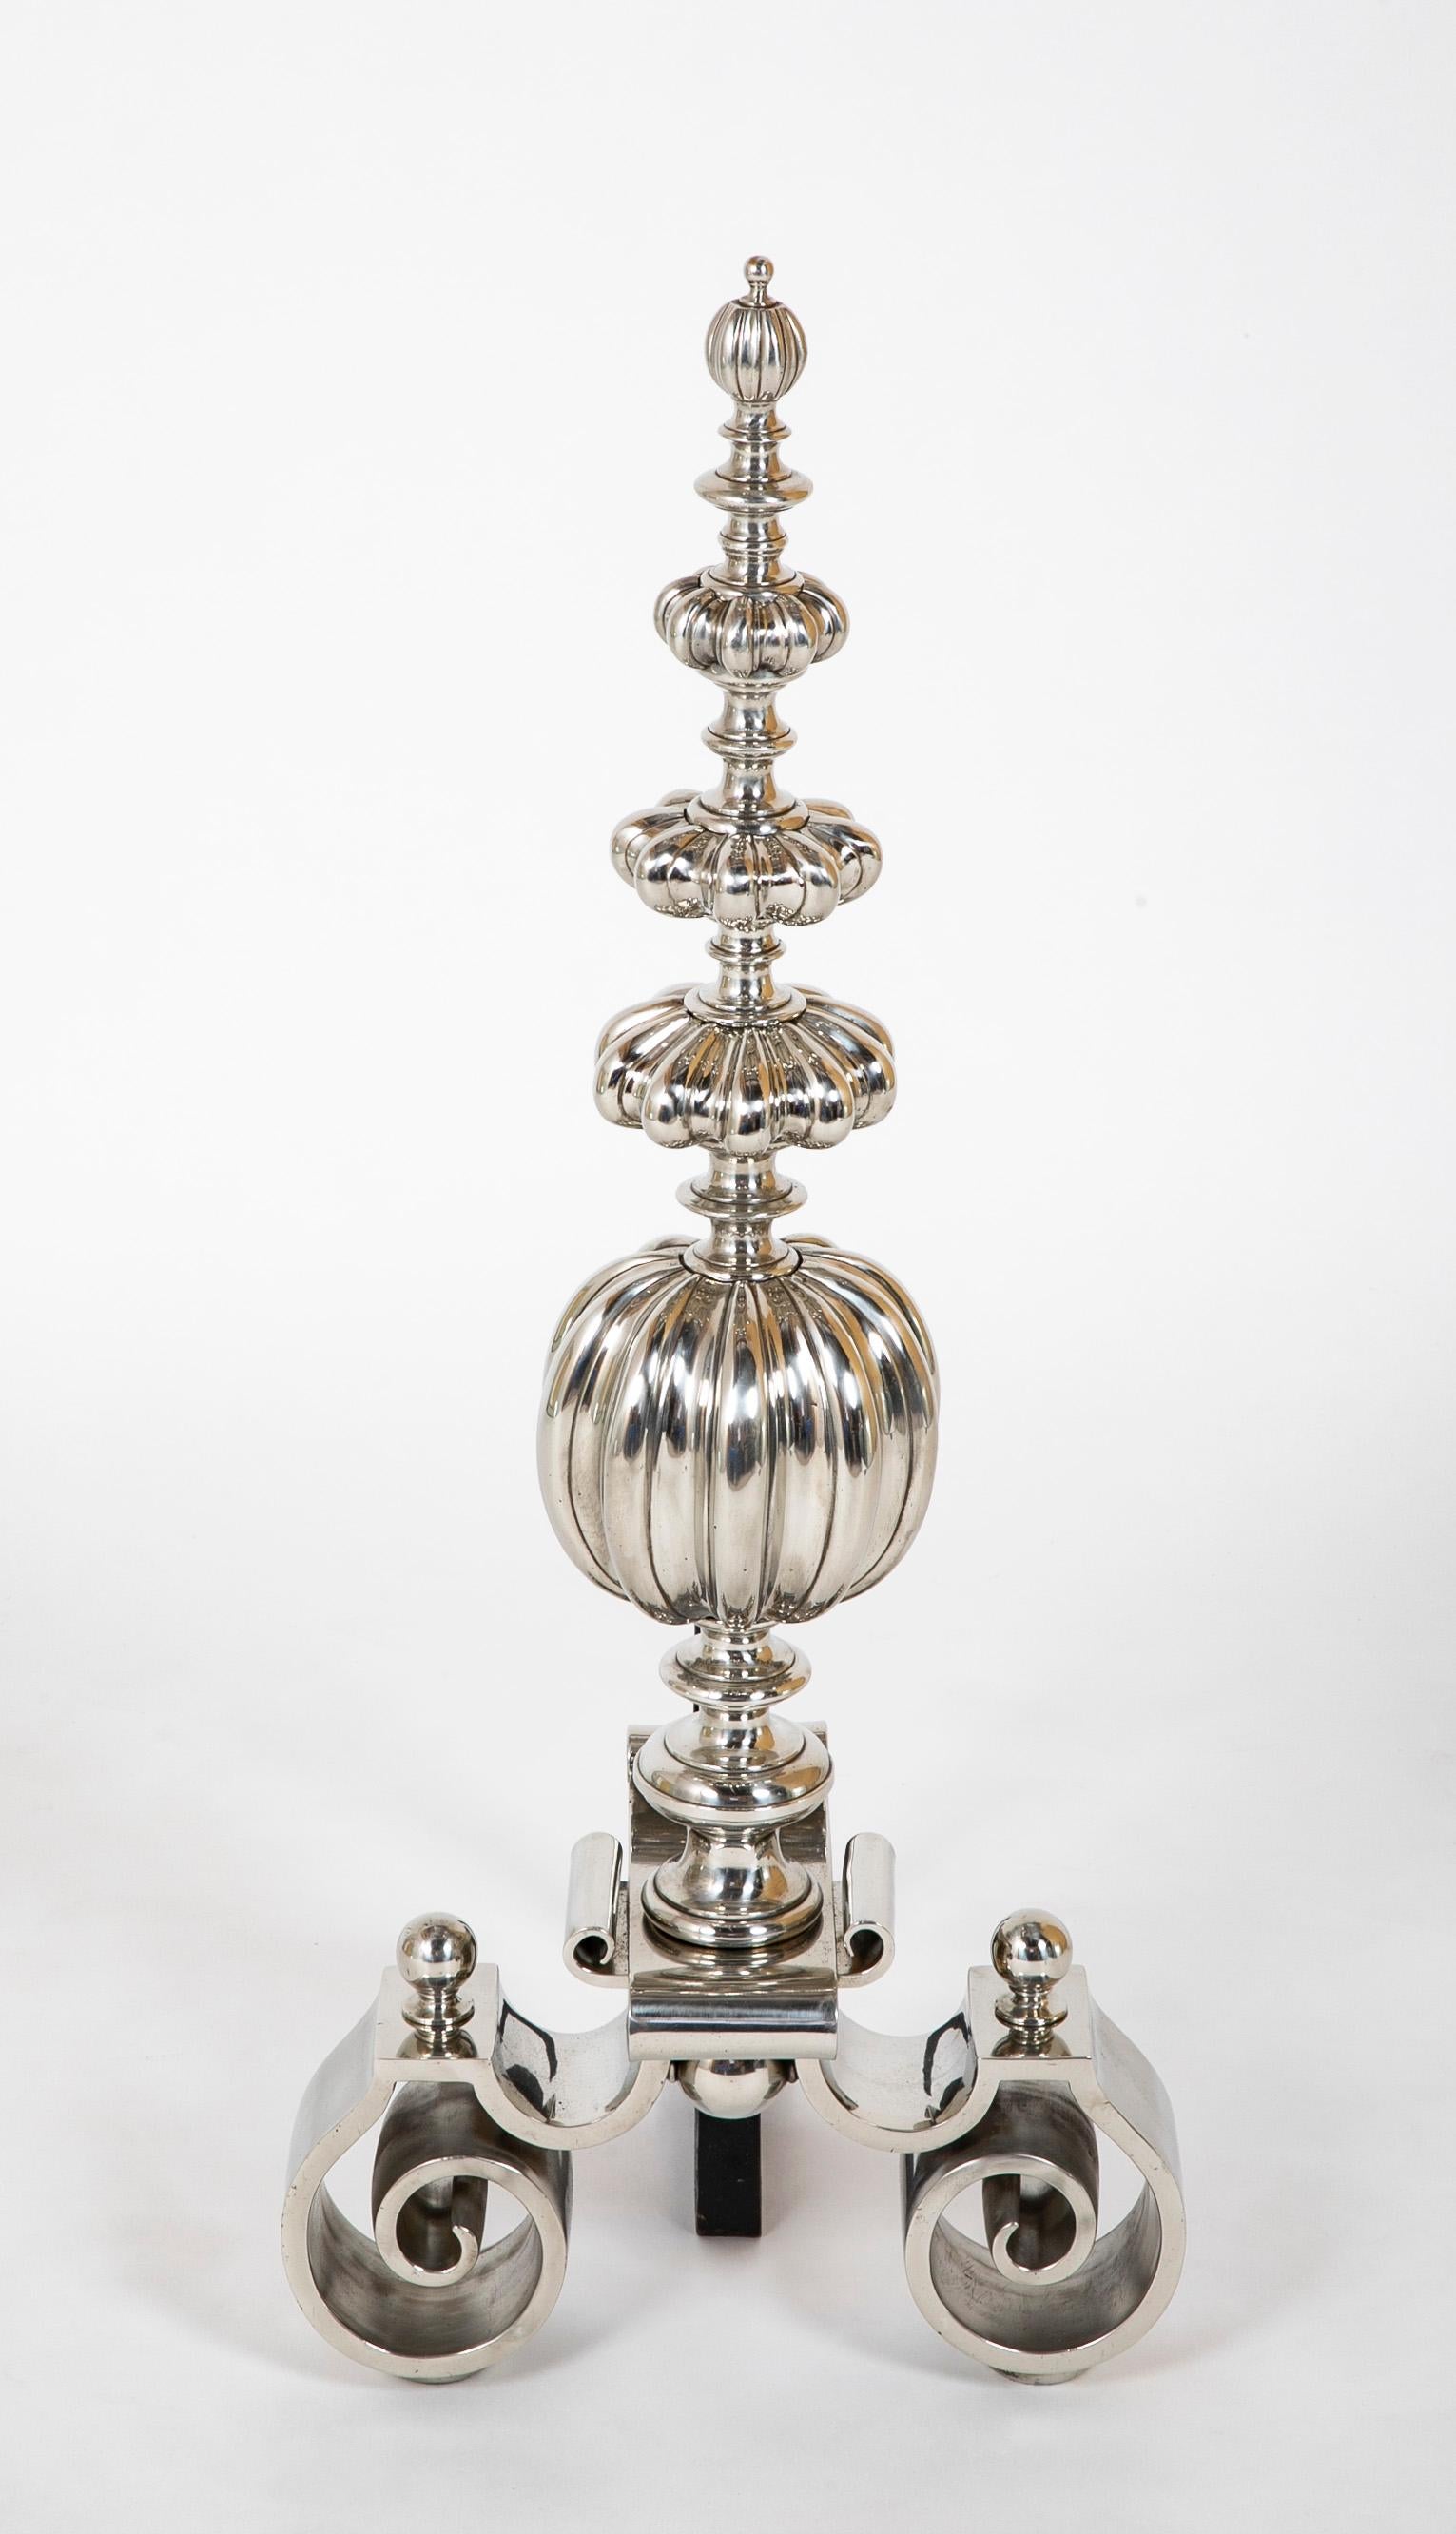 Fantastic pair of polished steel andirons in the Dutch Baroque style. With melon forms stacked above a delicately rendered S-curve base. A very successful modern interpretation of the 17th century Baroque style.
 